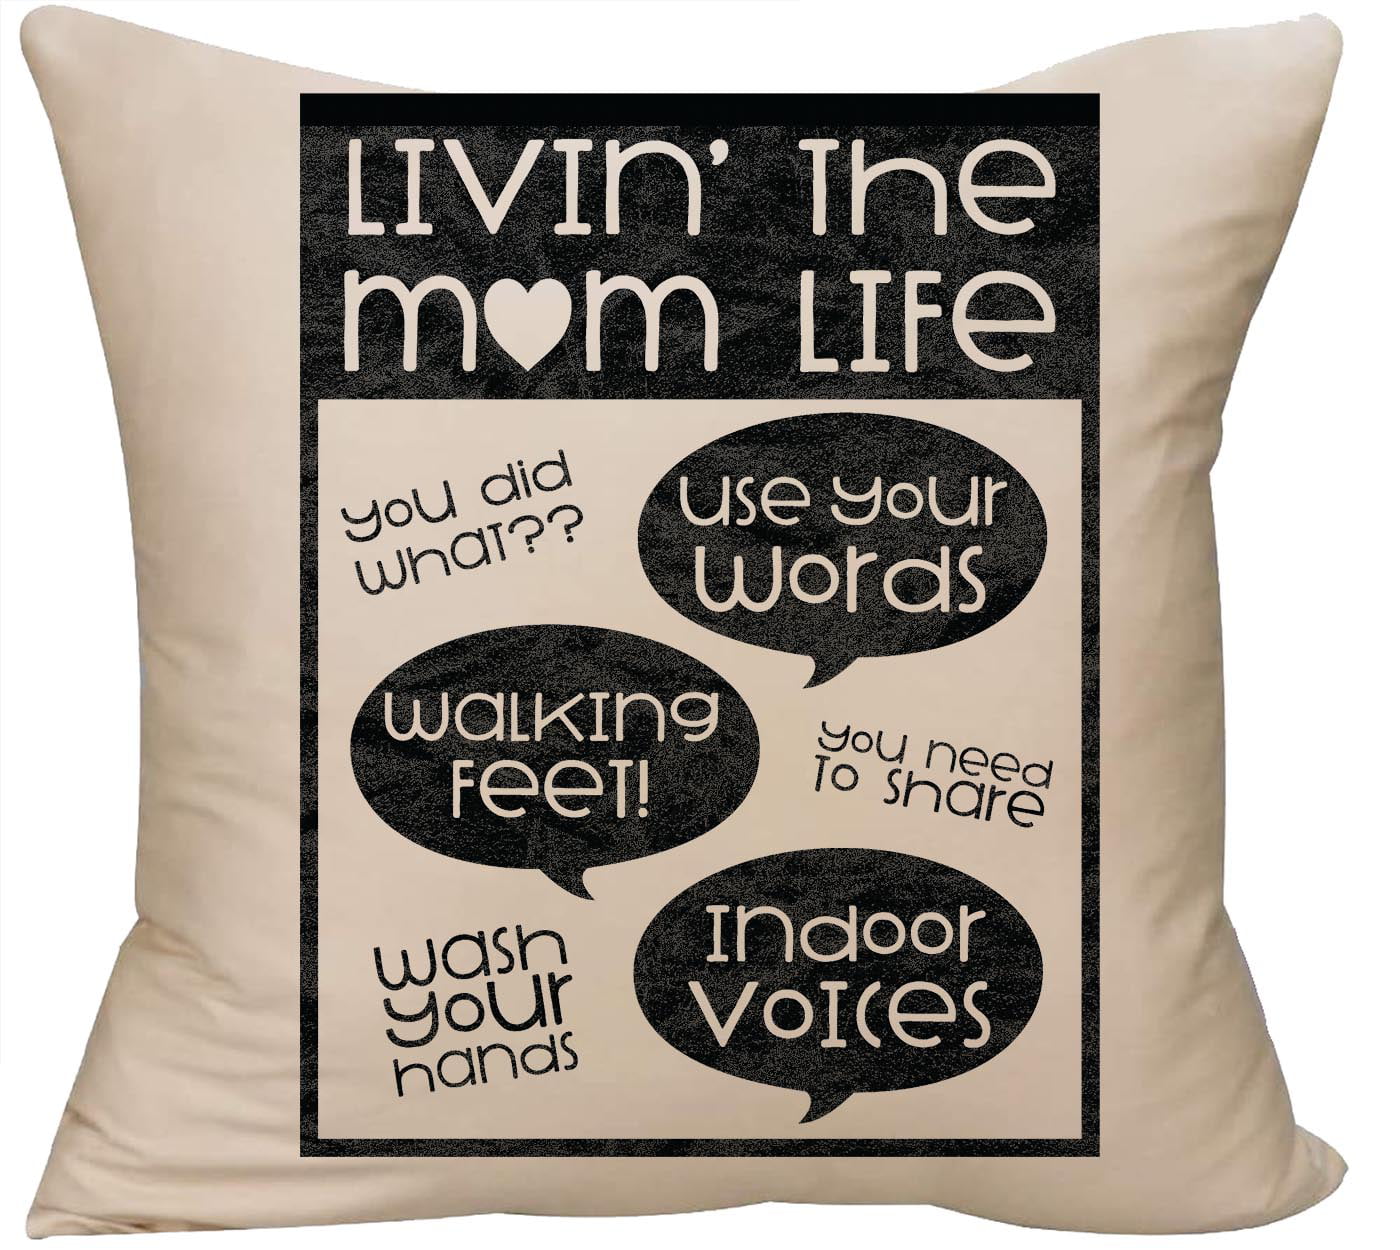 Livin' the mom life quotes heart funny saying motherhood parent Decorative  Throw Pillow cover 18 x 18 Beige Funny Gift 